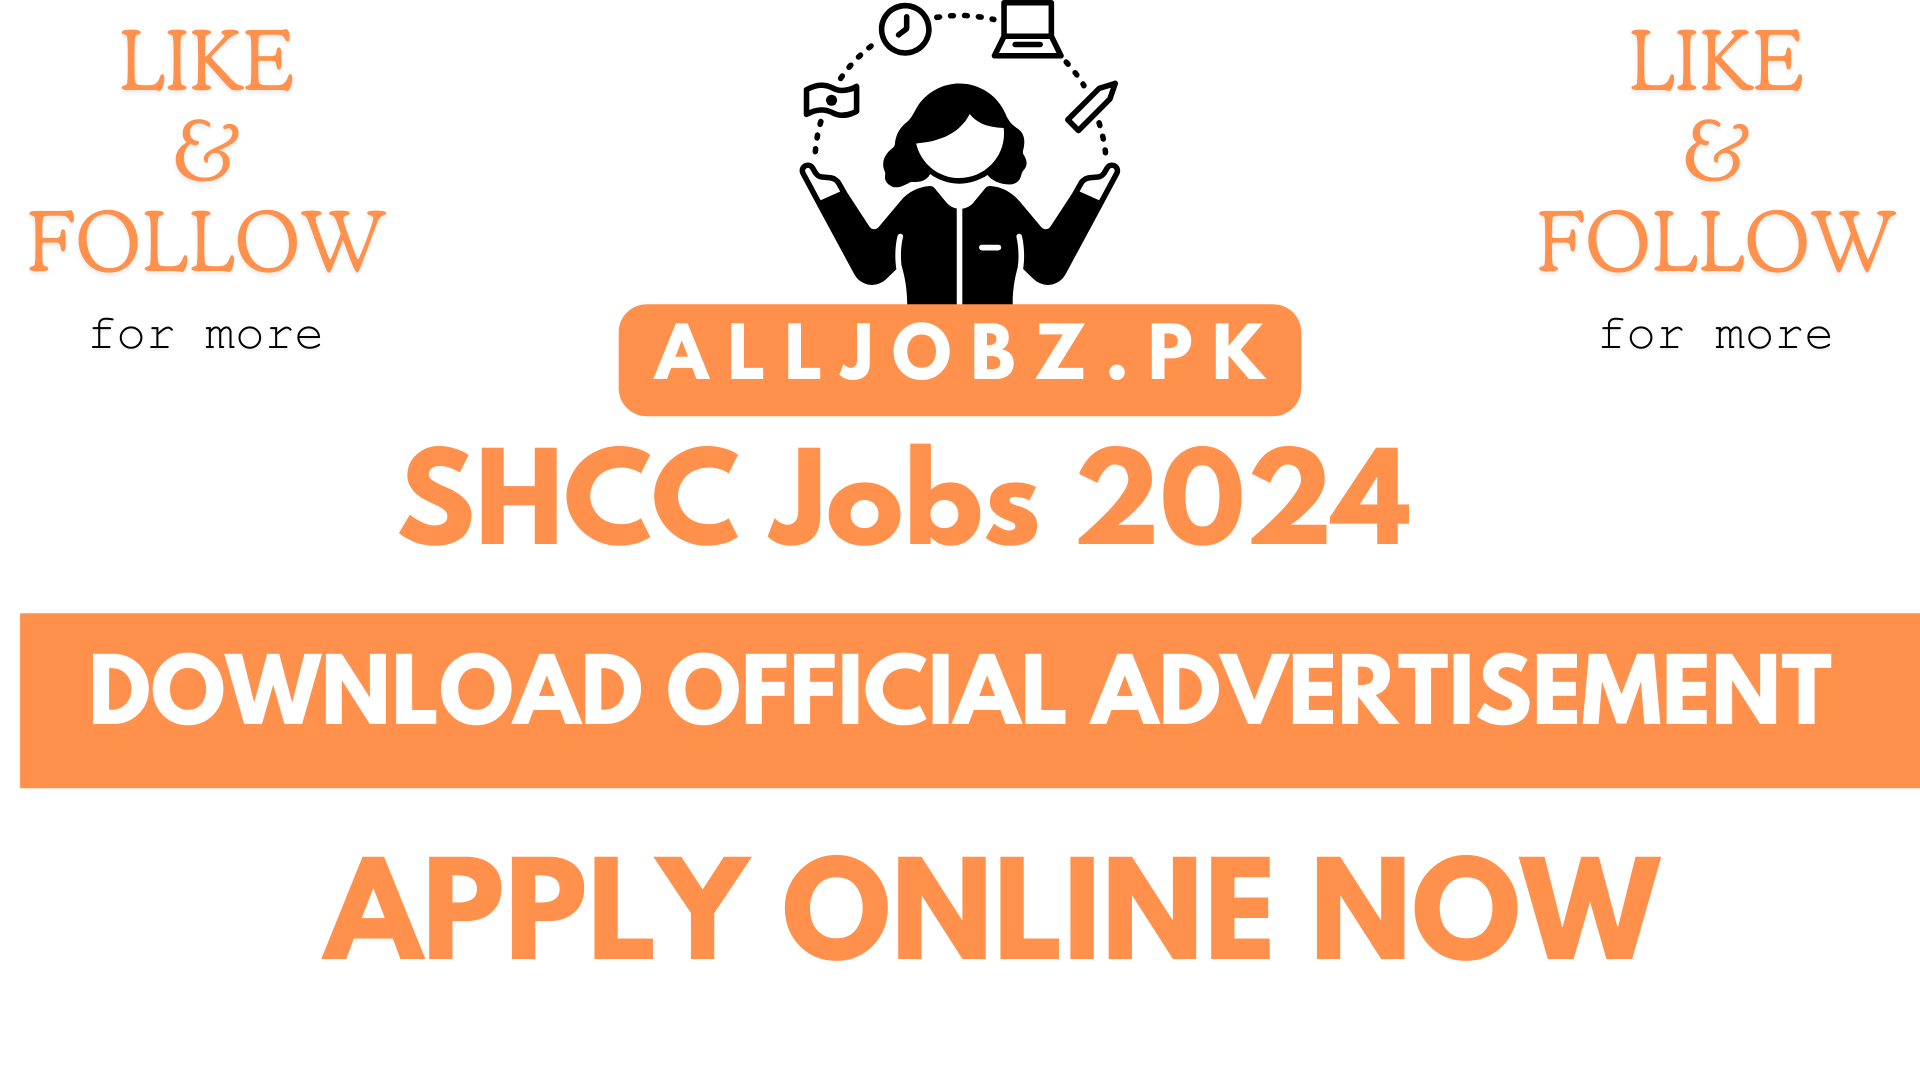 Sindh Health Care Commission Shcc Jobs 2024 Online Apply, Sindh Healthcare Commission, Shcc, Healthcare, Quackery, Vacancies, Contract Positions, Recruitment, Sindh, Assistant, Driver, Security Guard, Mali, Sanitary Worker, Eligibility Criteria, Domicile, Education, Experience, Application Process, Age Limit, Guidelines, How To Apply, Deadline, Benefits, Salary, Equal Opportunity Employer, Government, Renewal, Performance, Posting, Website, Chief Executive Officer, Karachi.